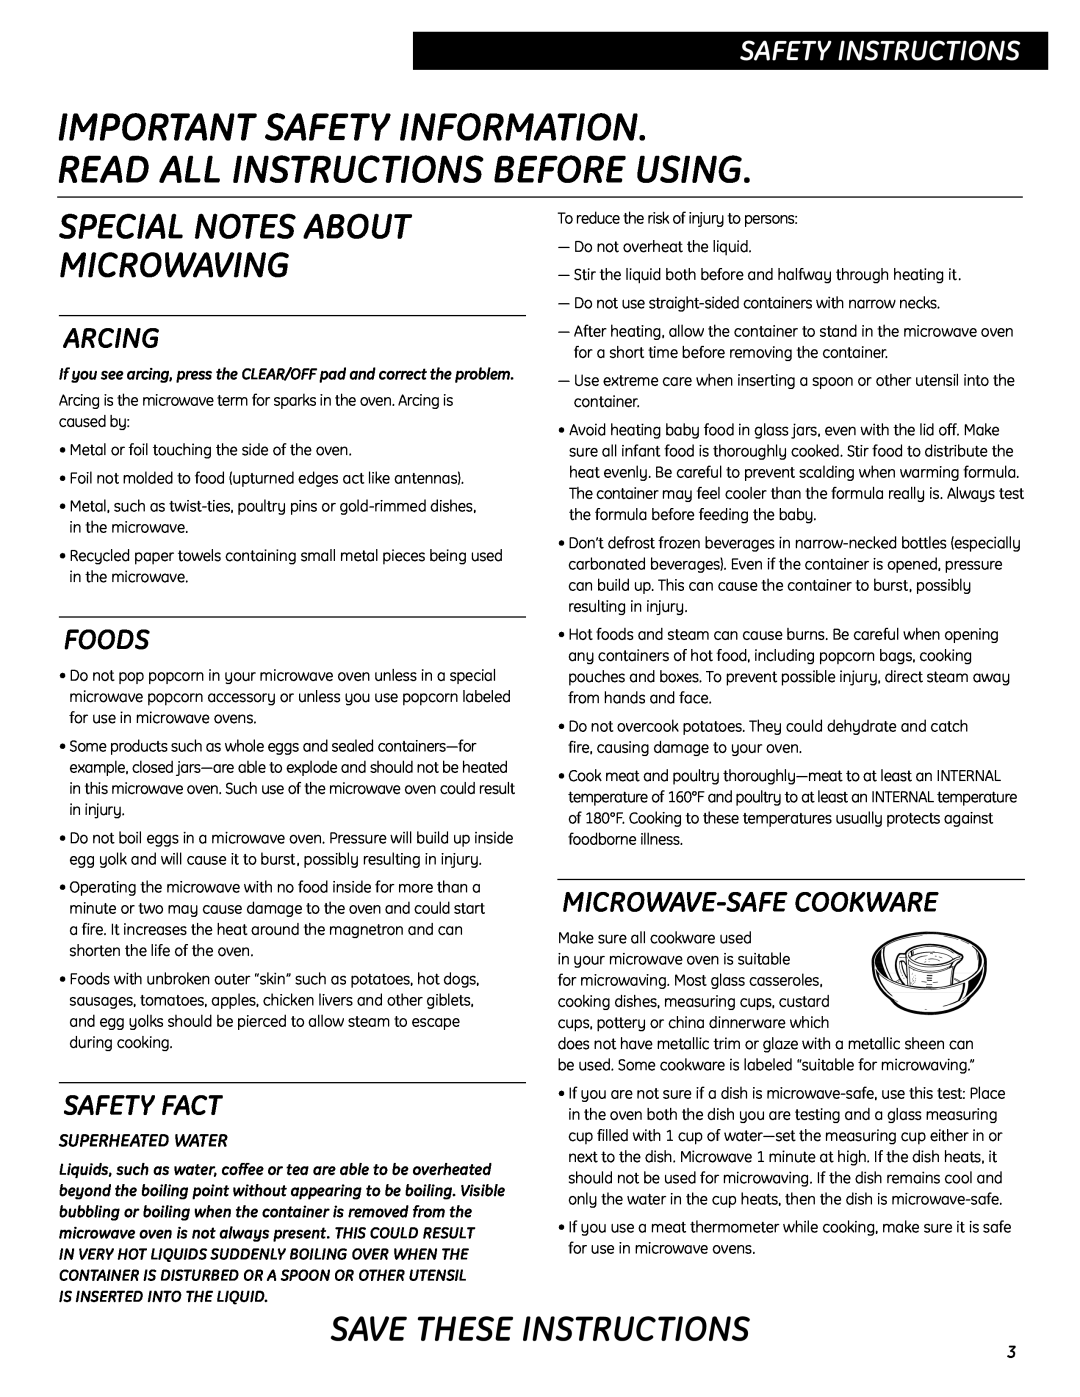 GE JES0737 Read All Instructions Before Using, Safety Instructions, Arcing, Foods, Safety Fact, Microwave-Safecookware 